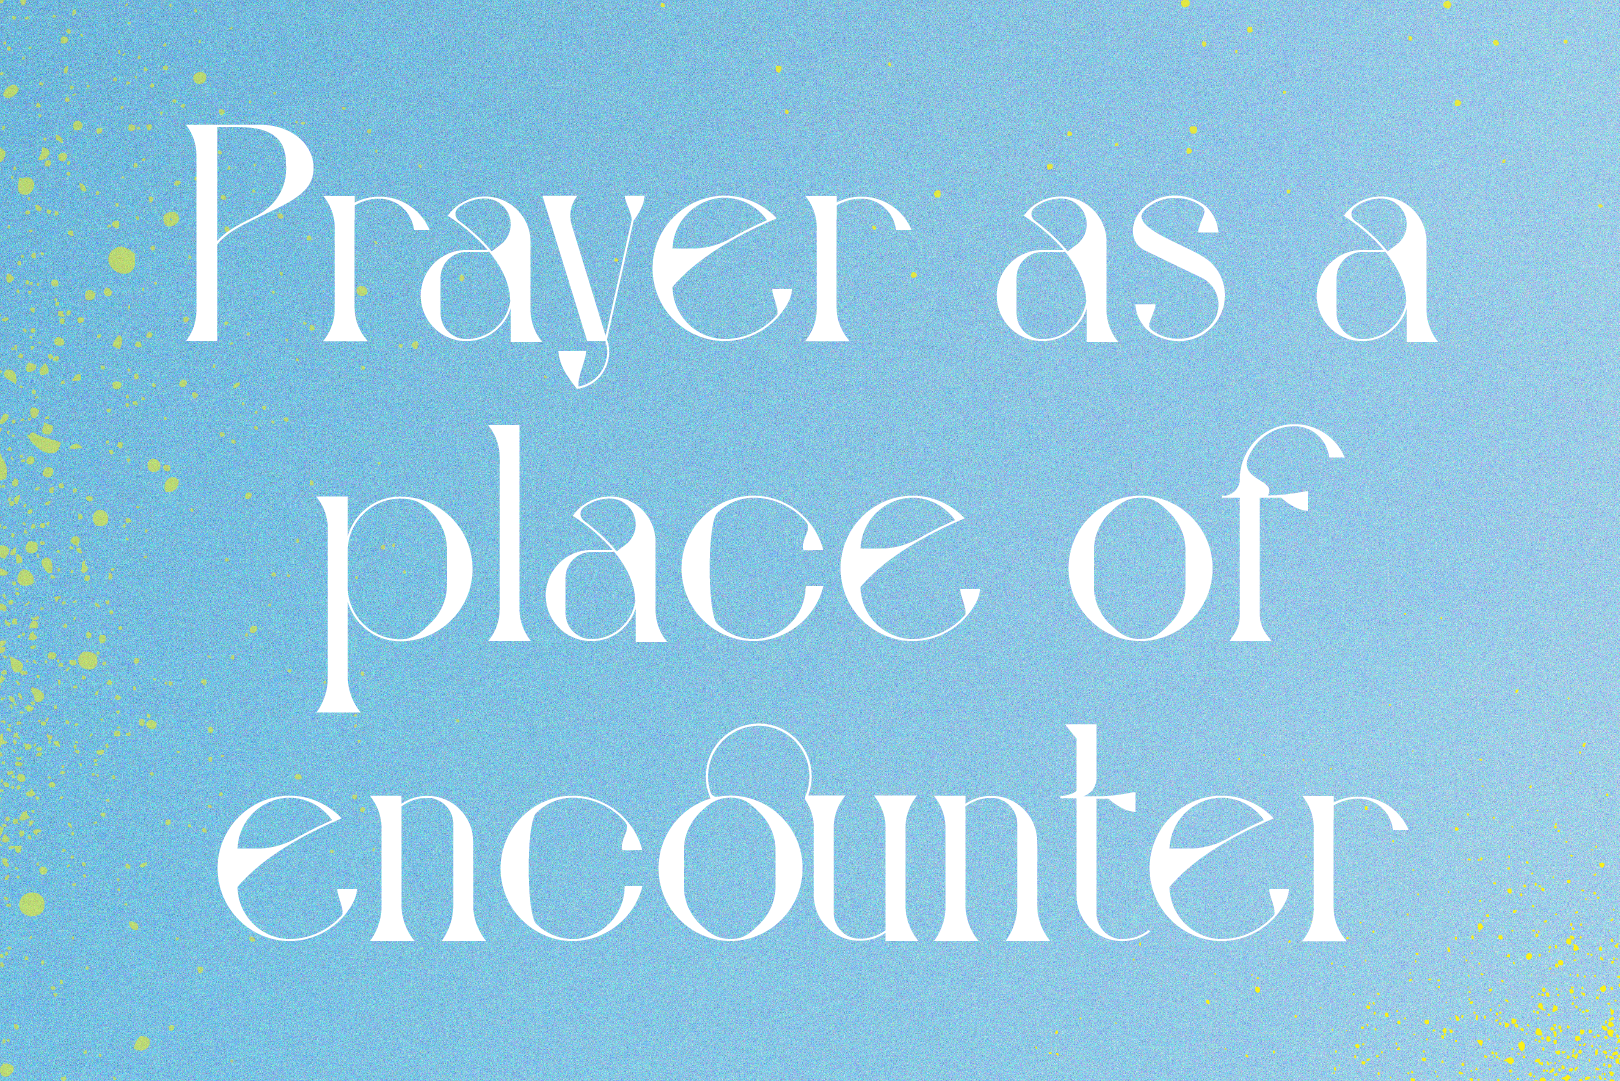 Prayer as a place of encounter